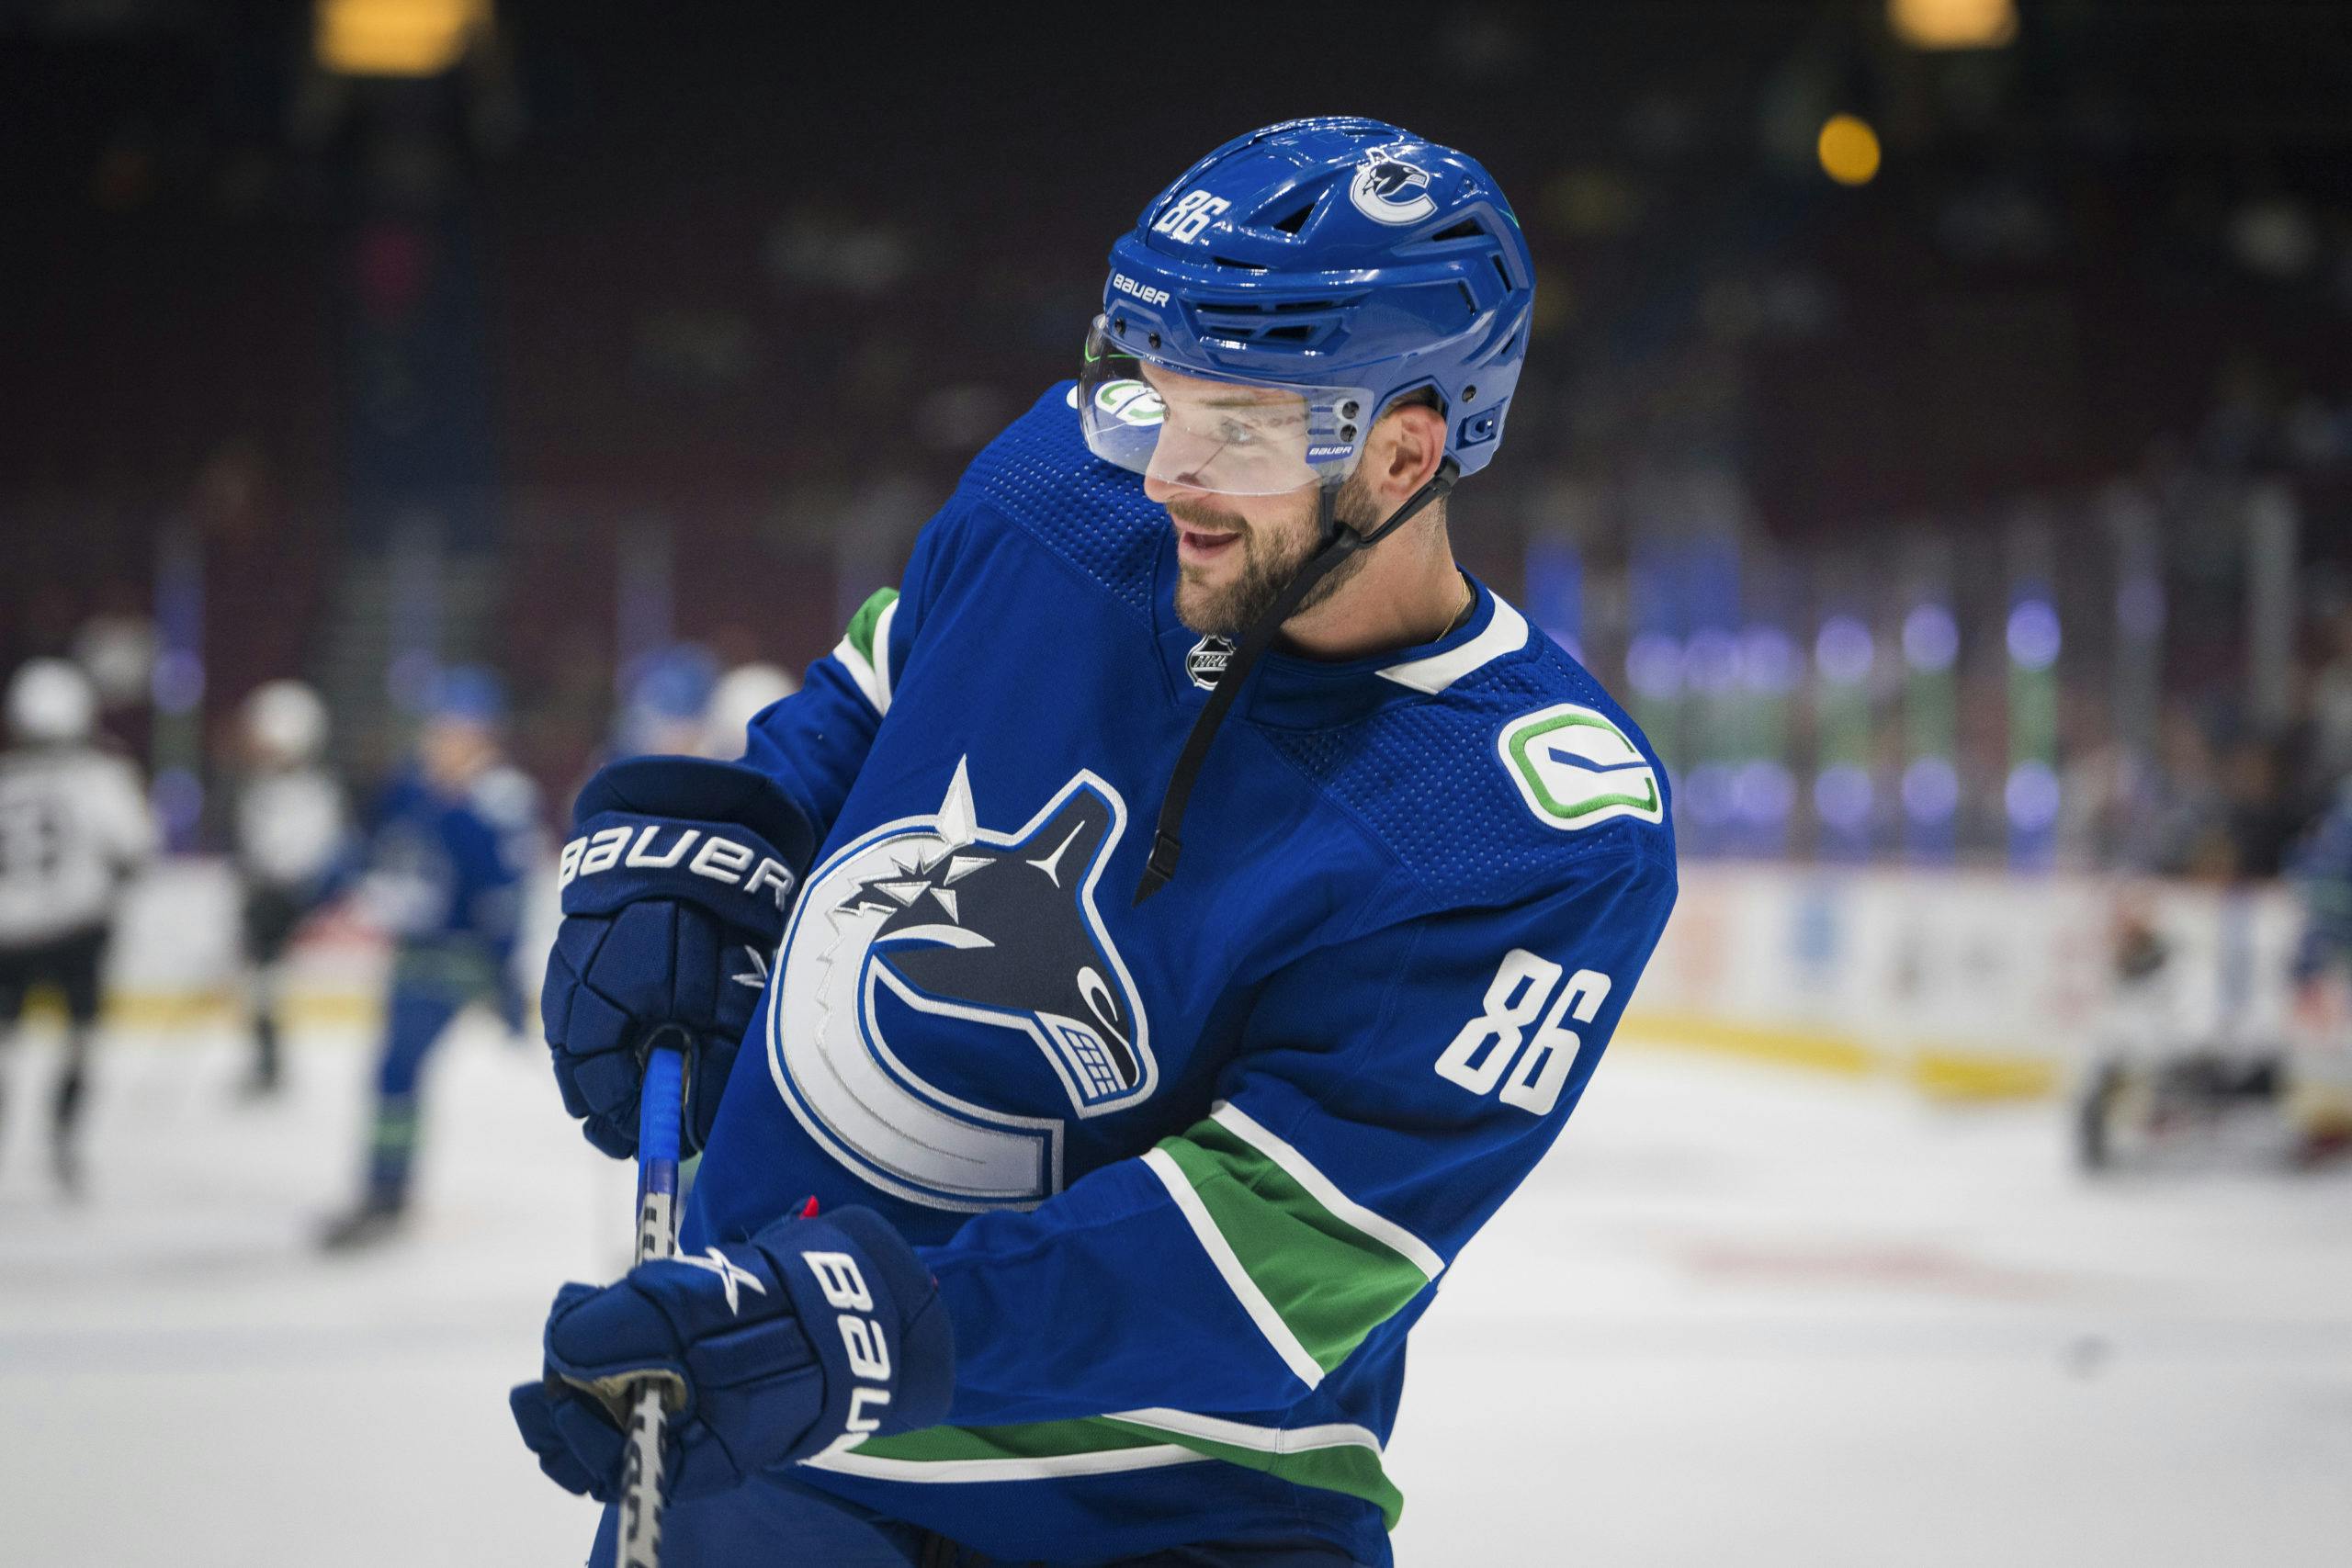 Vancouver Canucks call up redhot defenceman Christian Wolanin, place